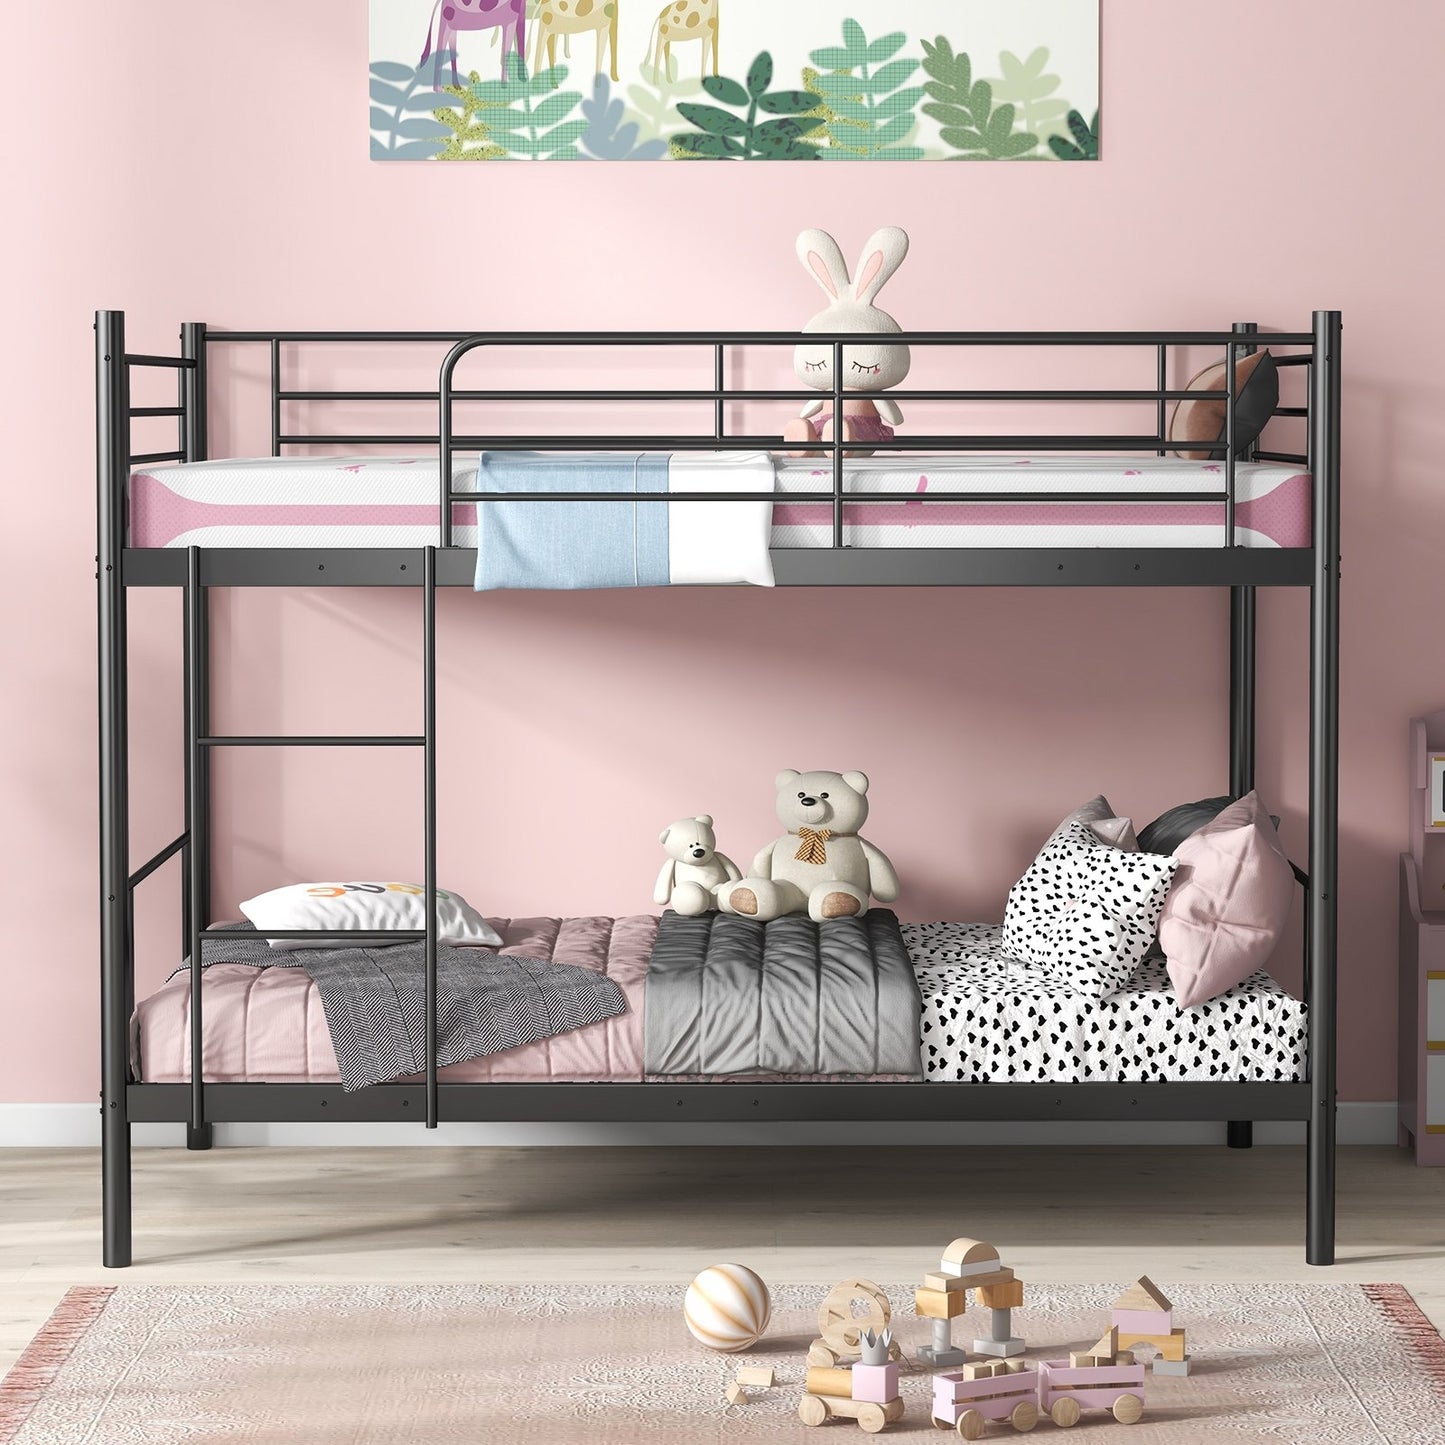 Metal Bunk Bed with Ladder and Full-length Guardrails, Black